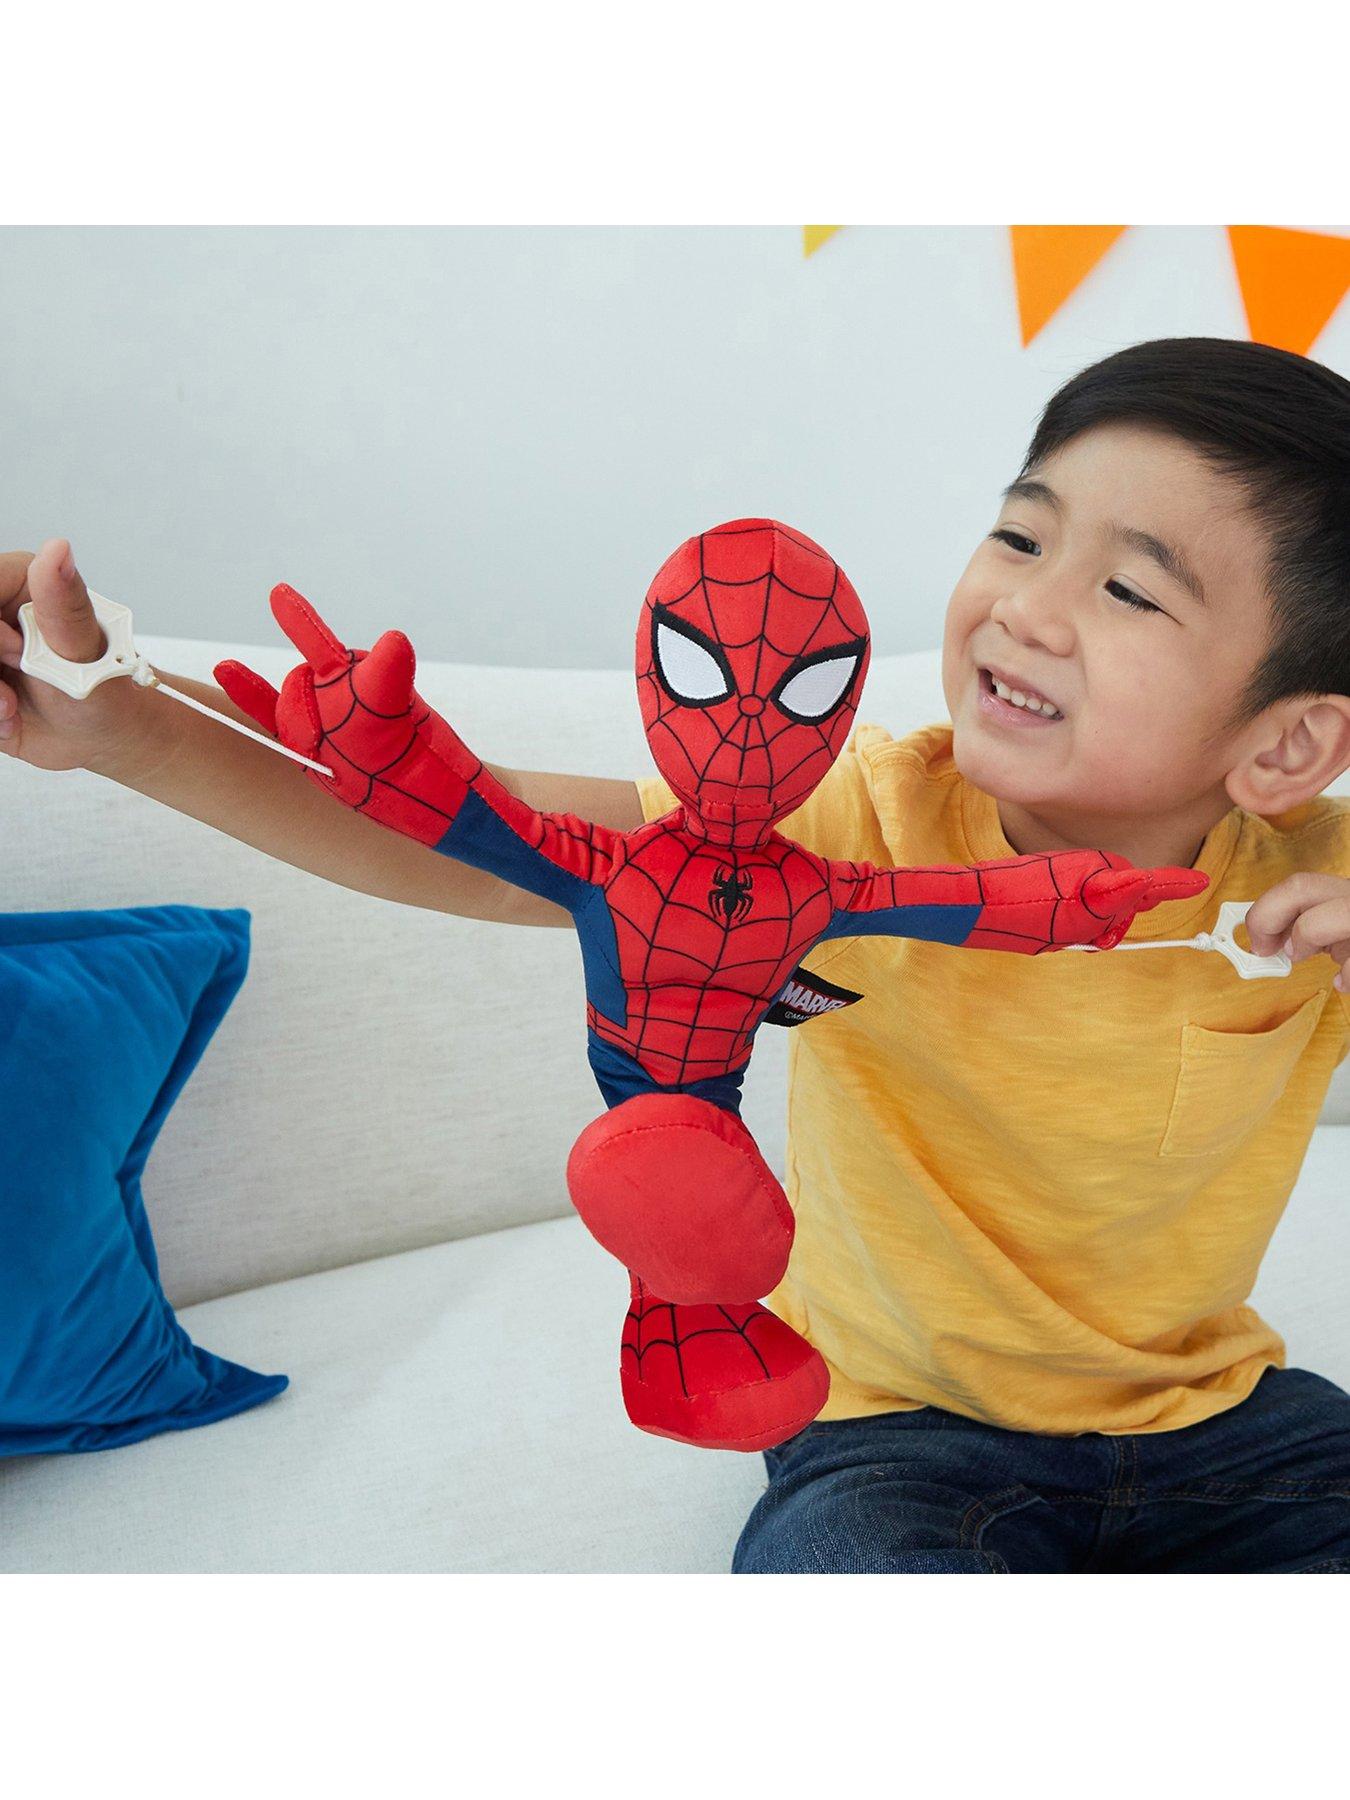 Details about   Comic Marvel Comics Spider-Man Super plush doll toy 7" Super Hero Christmas Gift 